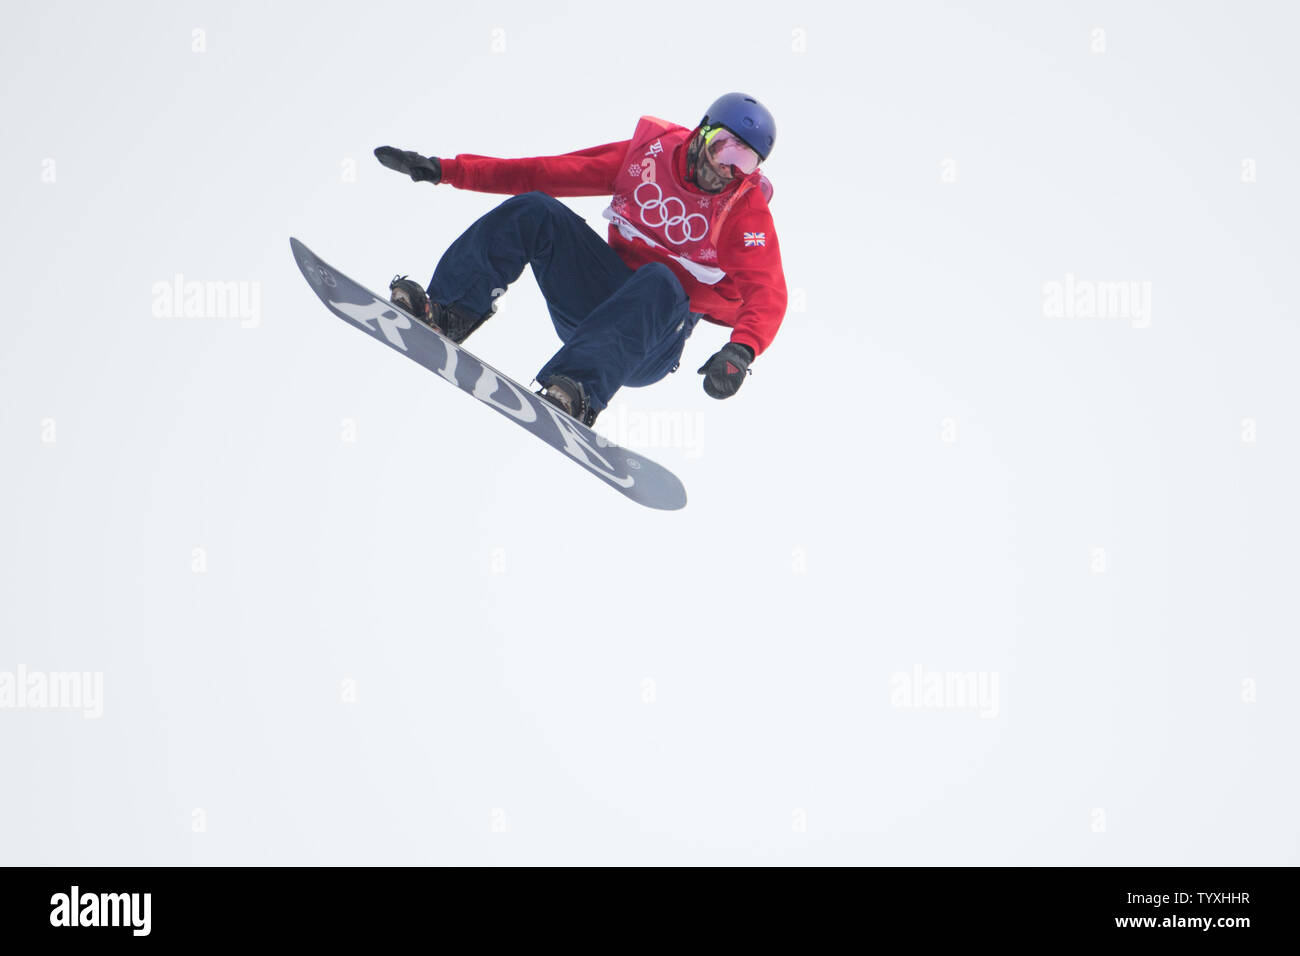 Billy Morgan of Great Britain competes in the Men's Big Air Snowboard final  in the 2018 Pyeongchang Olympics at the Alpensia Ski Jumping Centre in  Pyeongchang, South Korea on February 24, 2018.